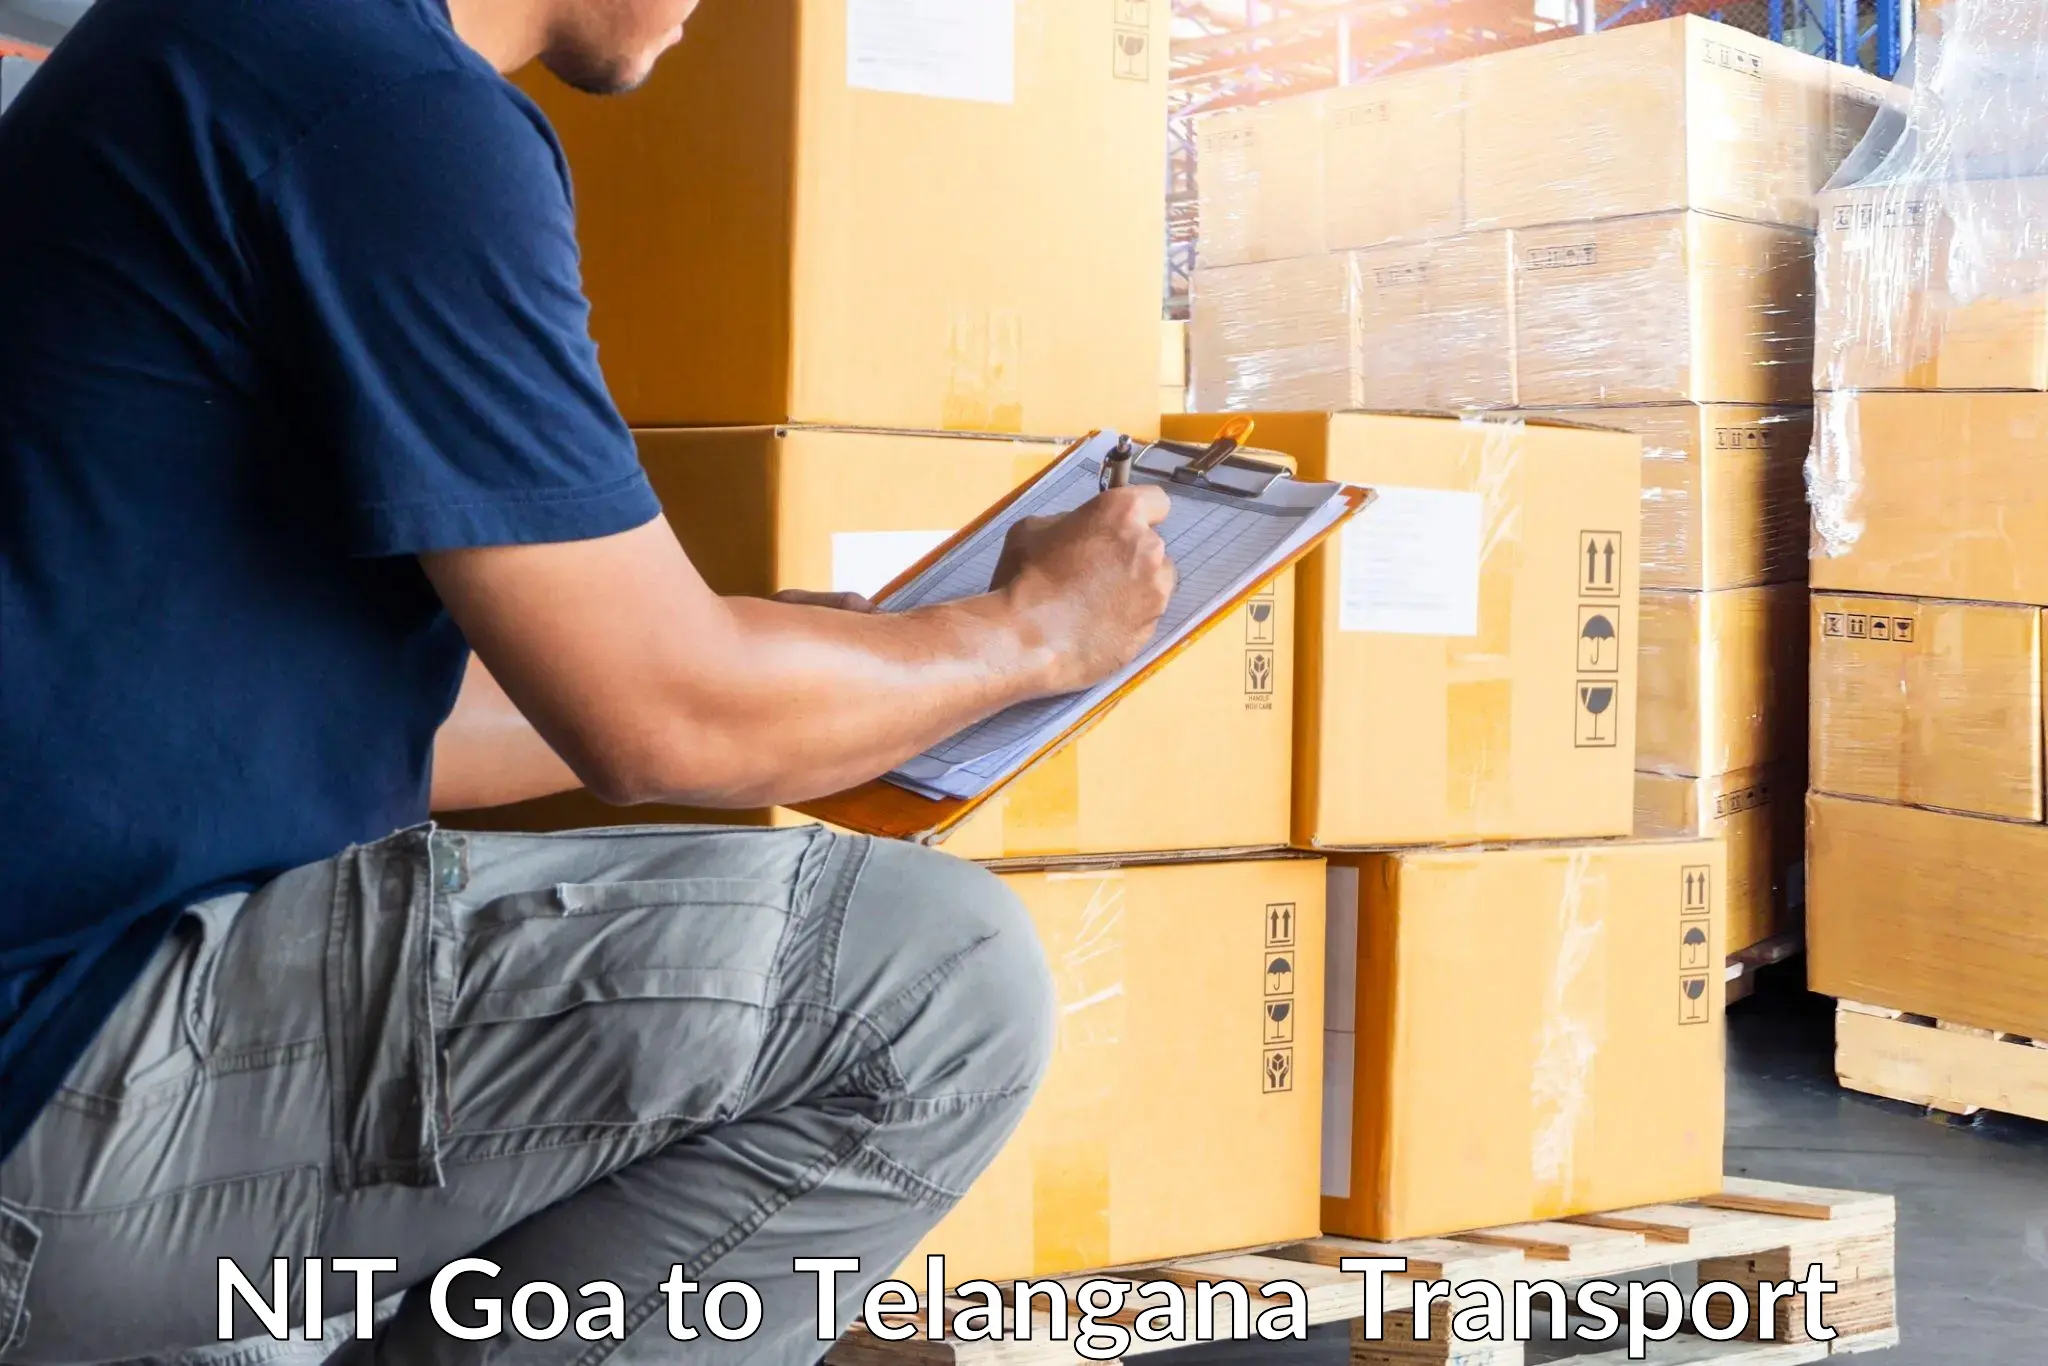 Container transport service NIT Goa to Hyderabad